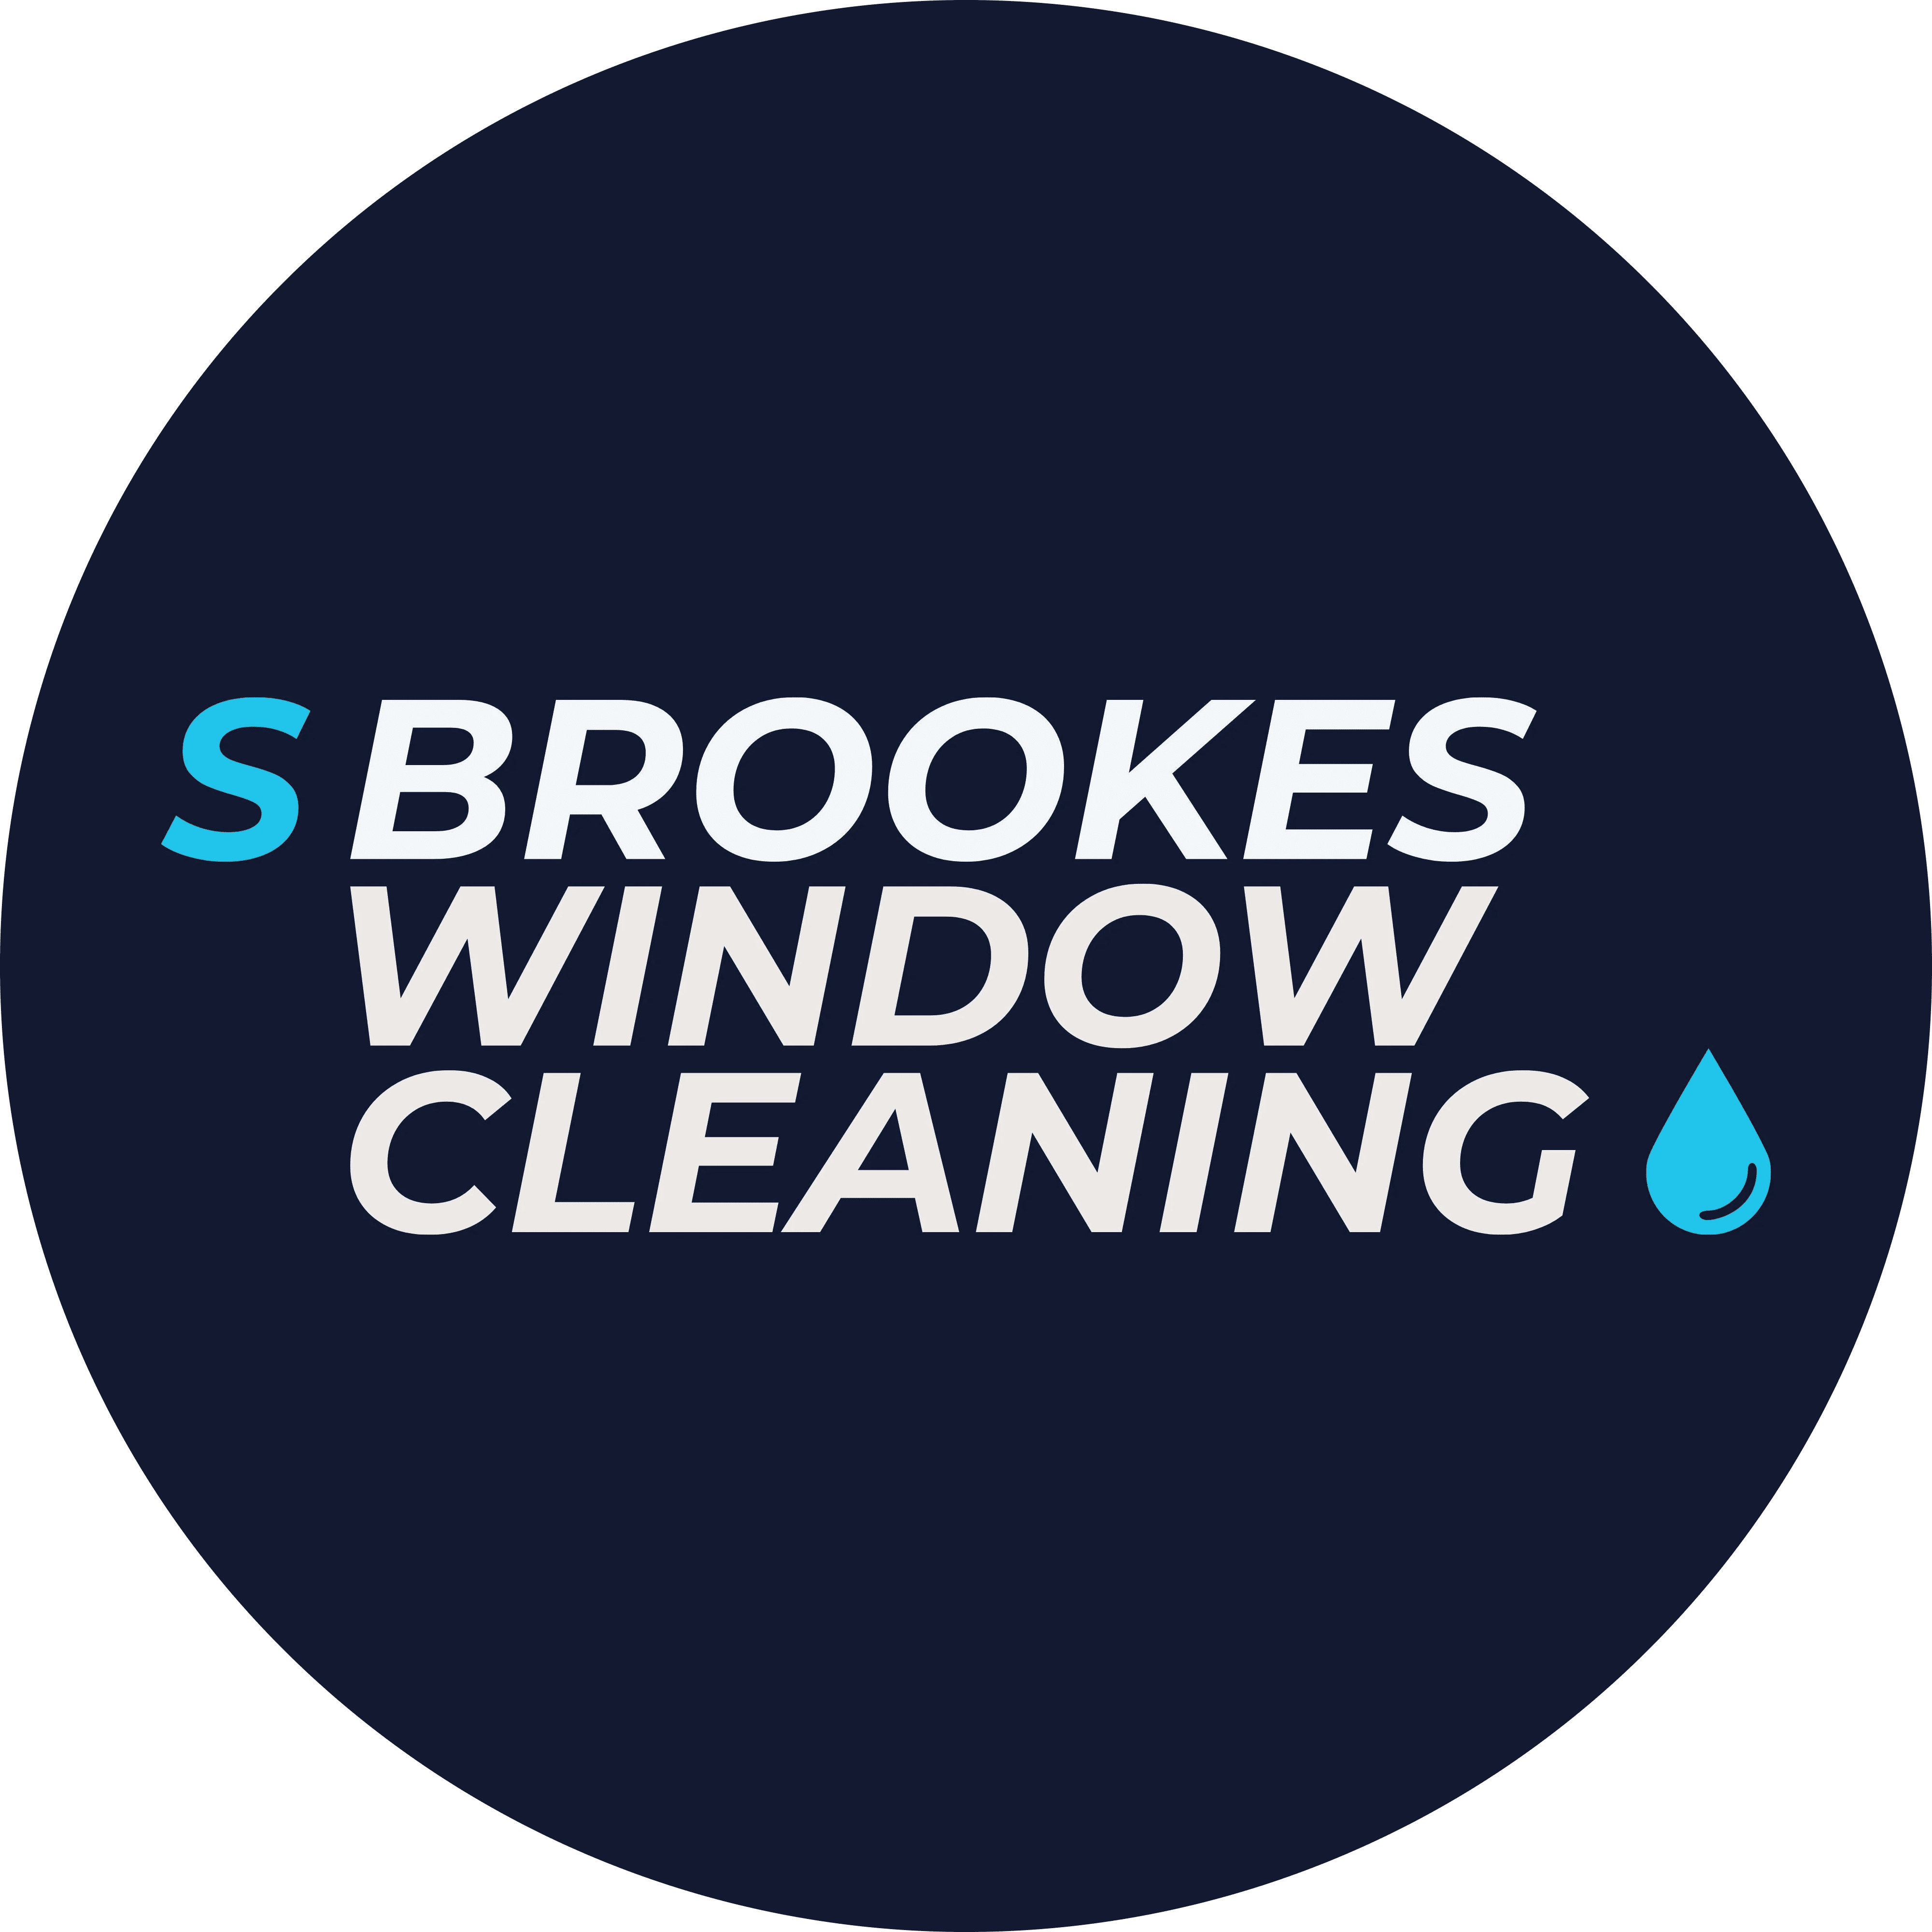 S Brookes Window Cleaning